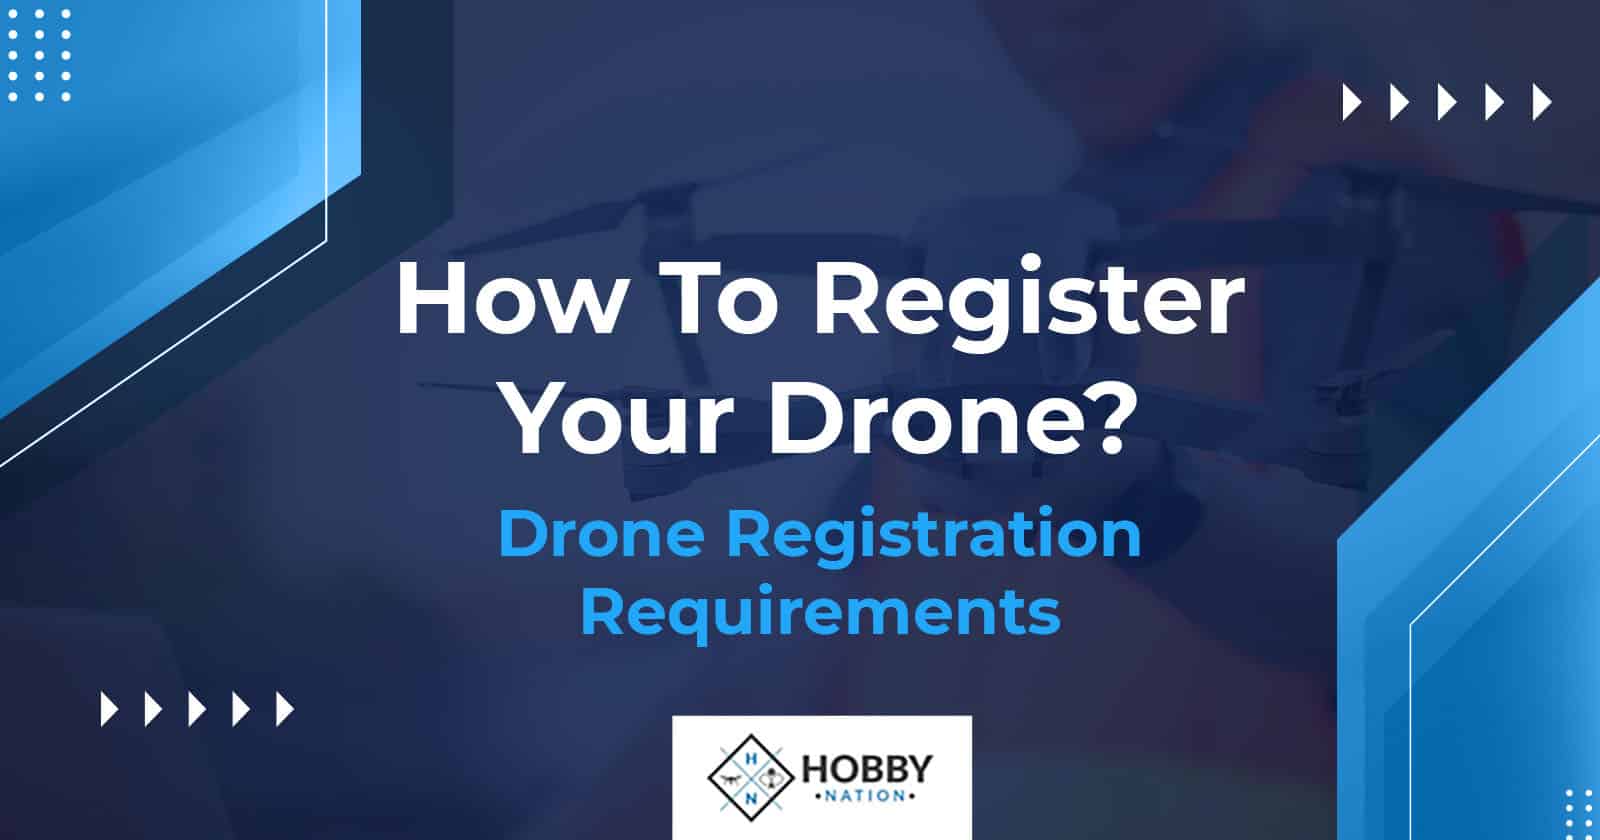 How To Register Your Drone? Drone Registration Requirements